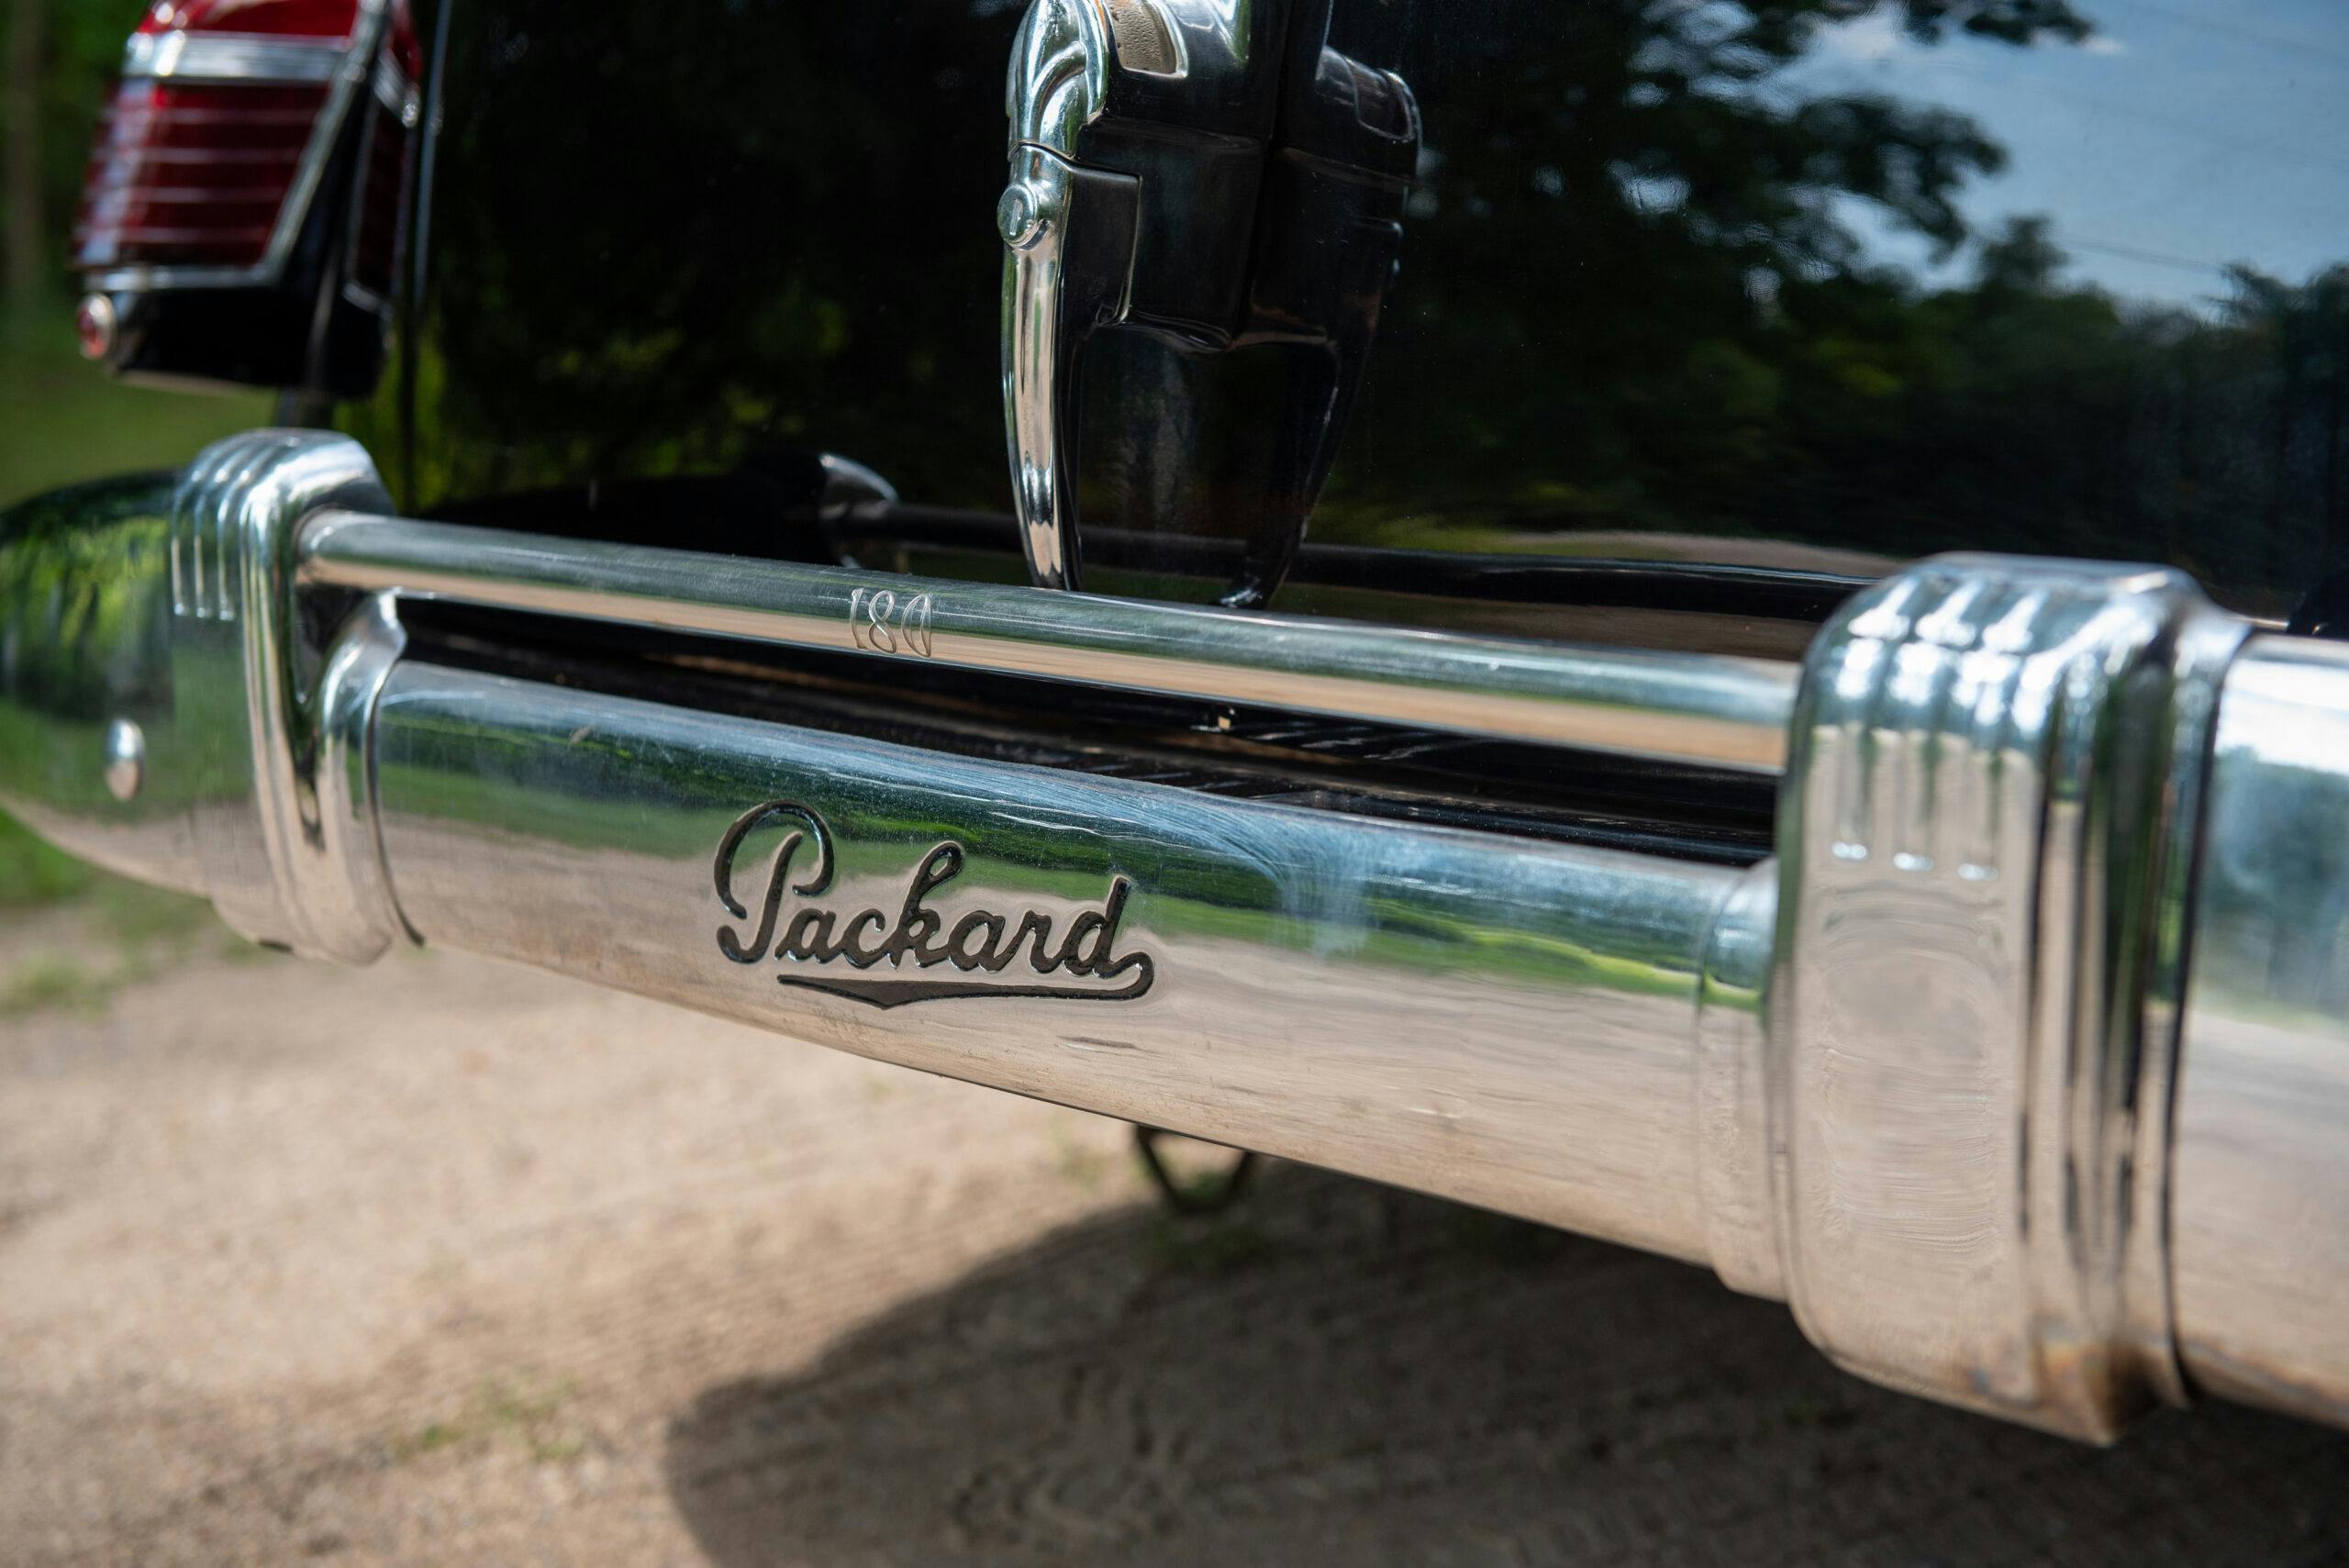 1941 Packard Super Eight One-Eighty Limo lettering